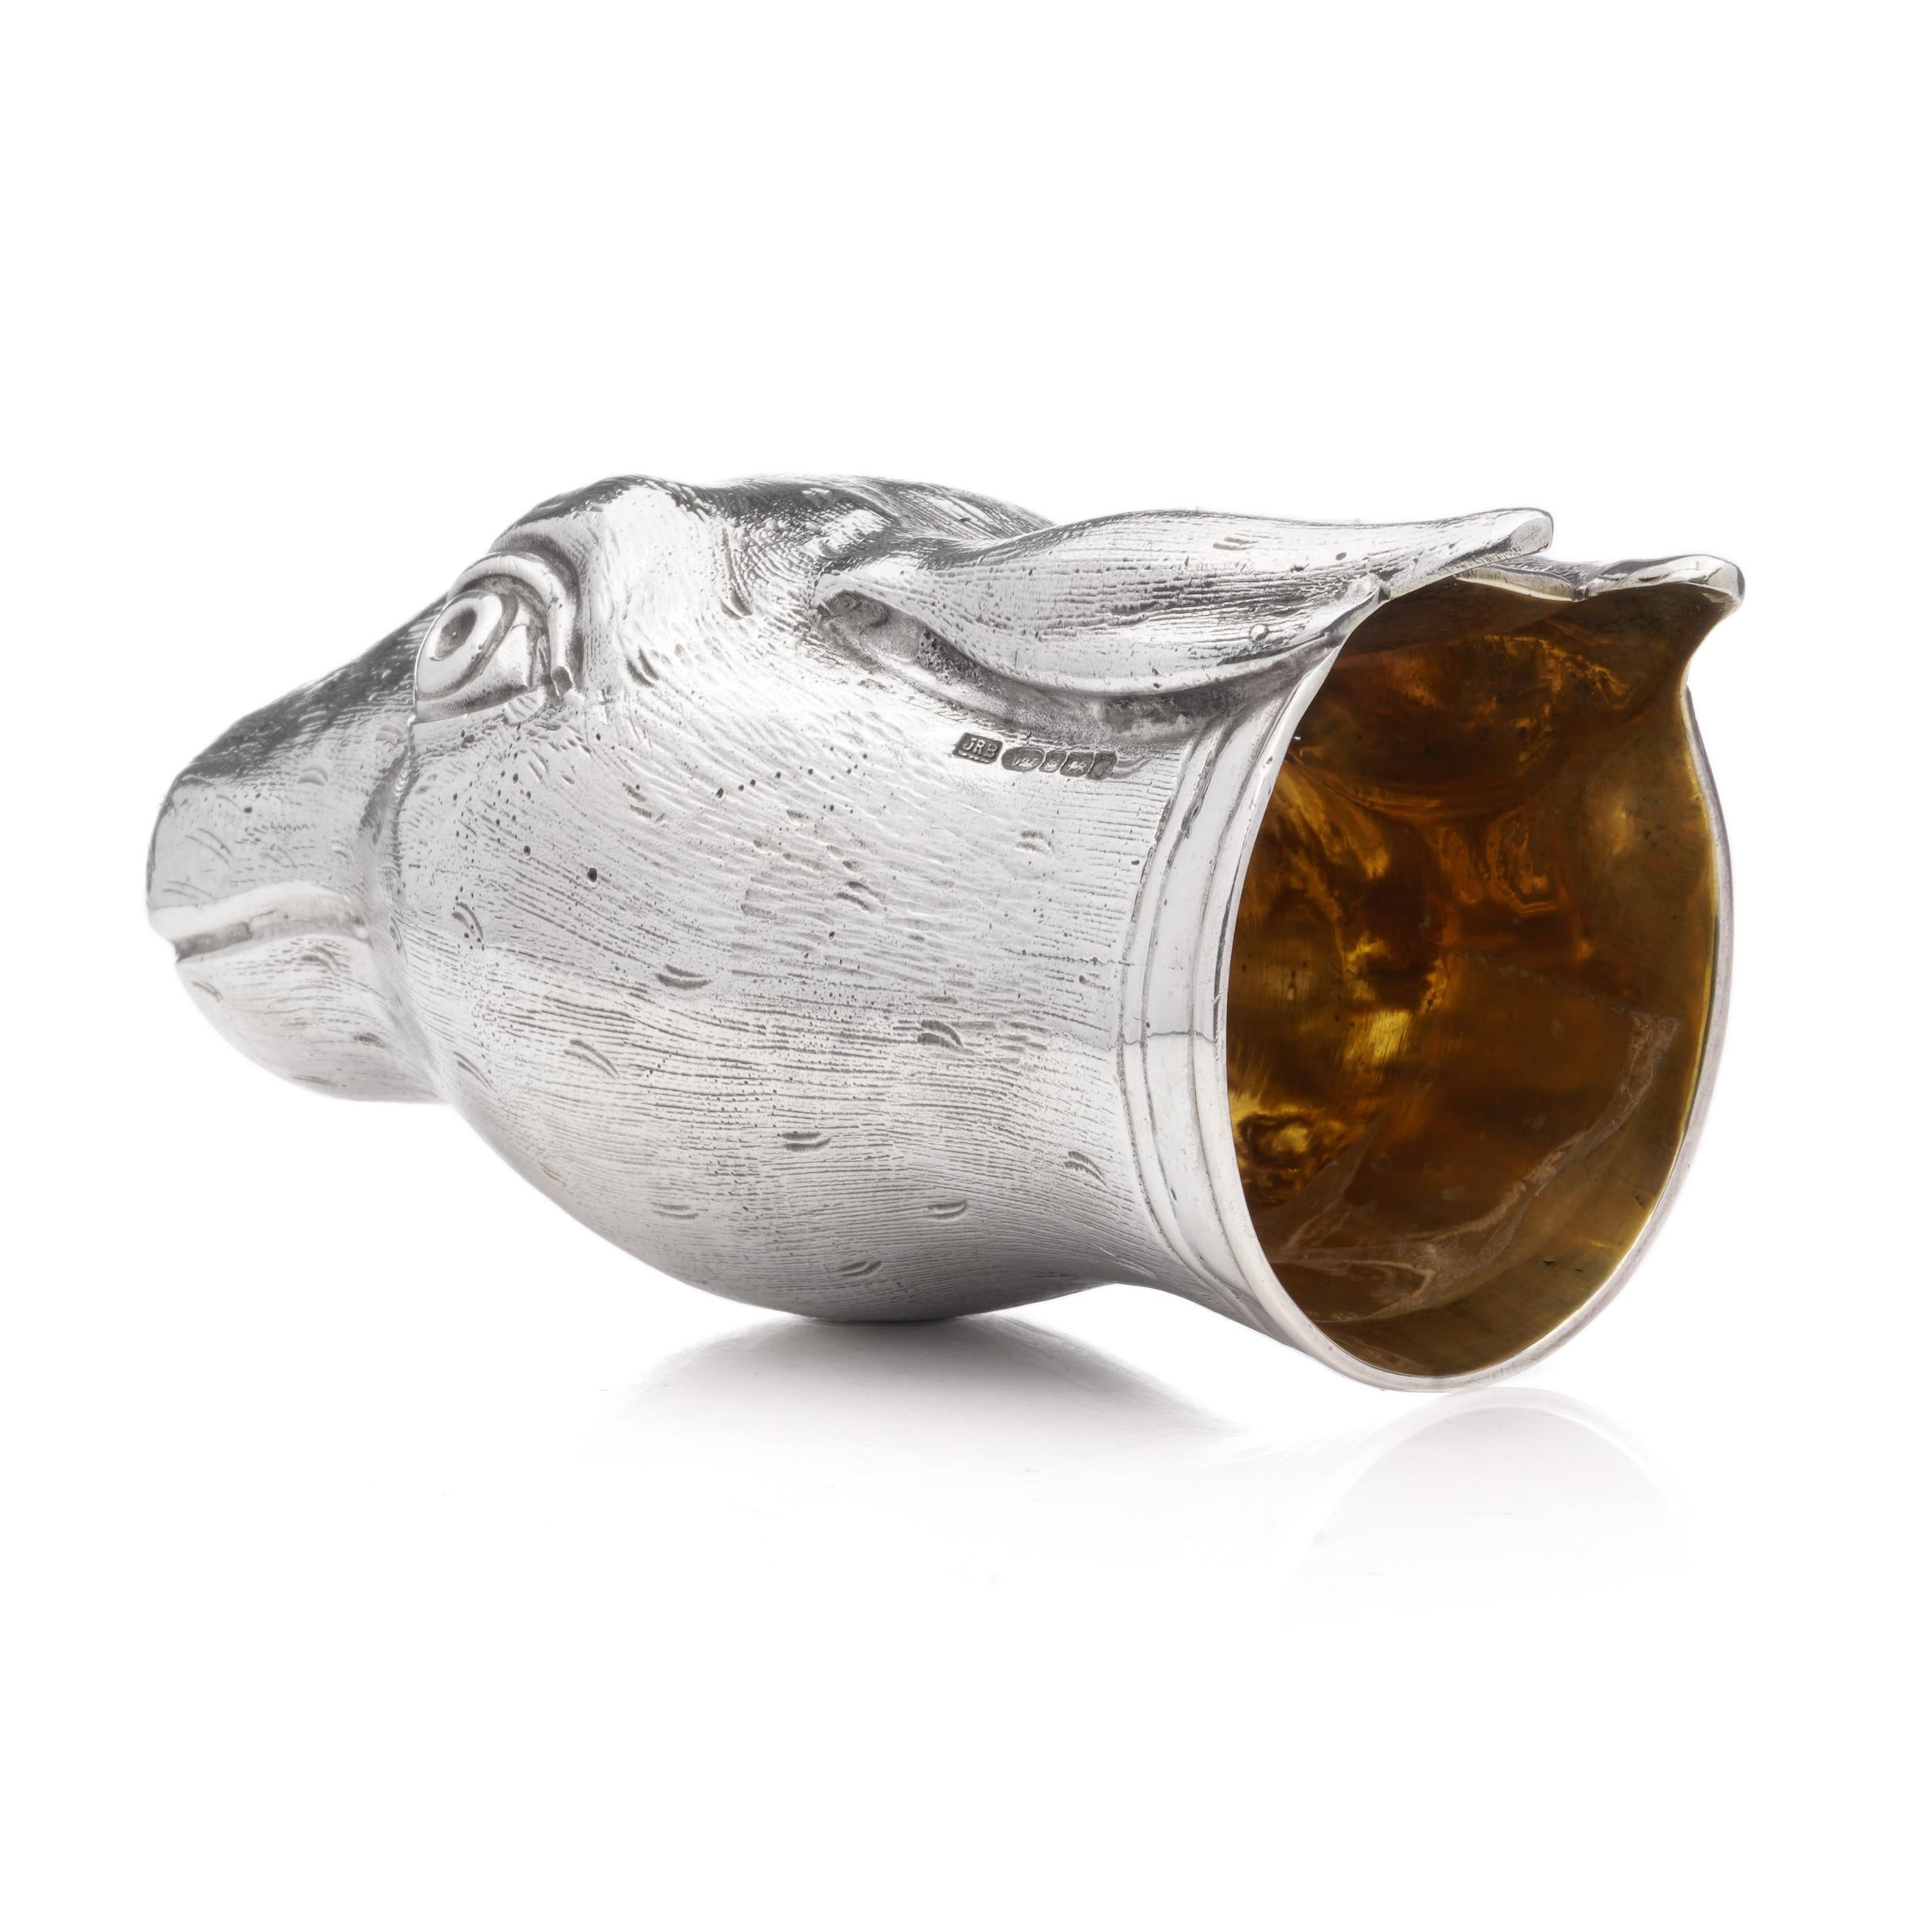 Contemporary Exceptional Modern Sterling Silver Stirrup Cup Shaped as a Rabbit For Sale